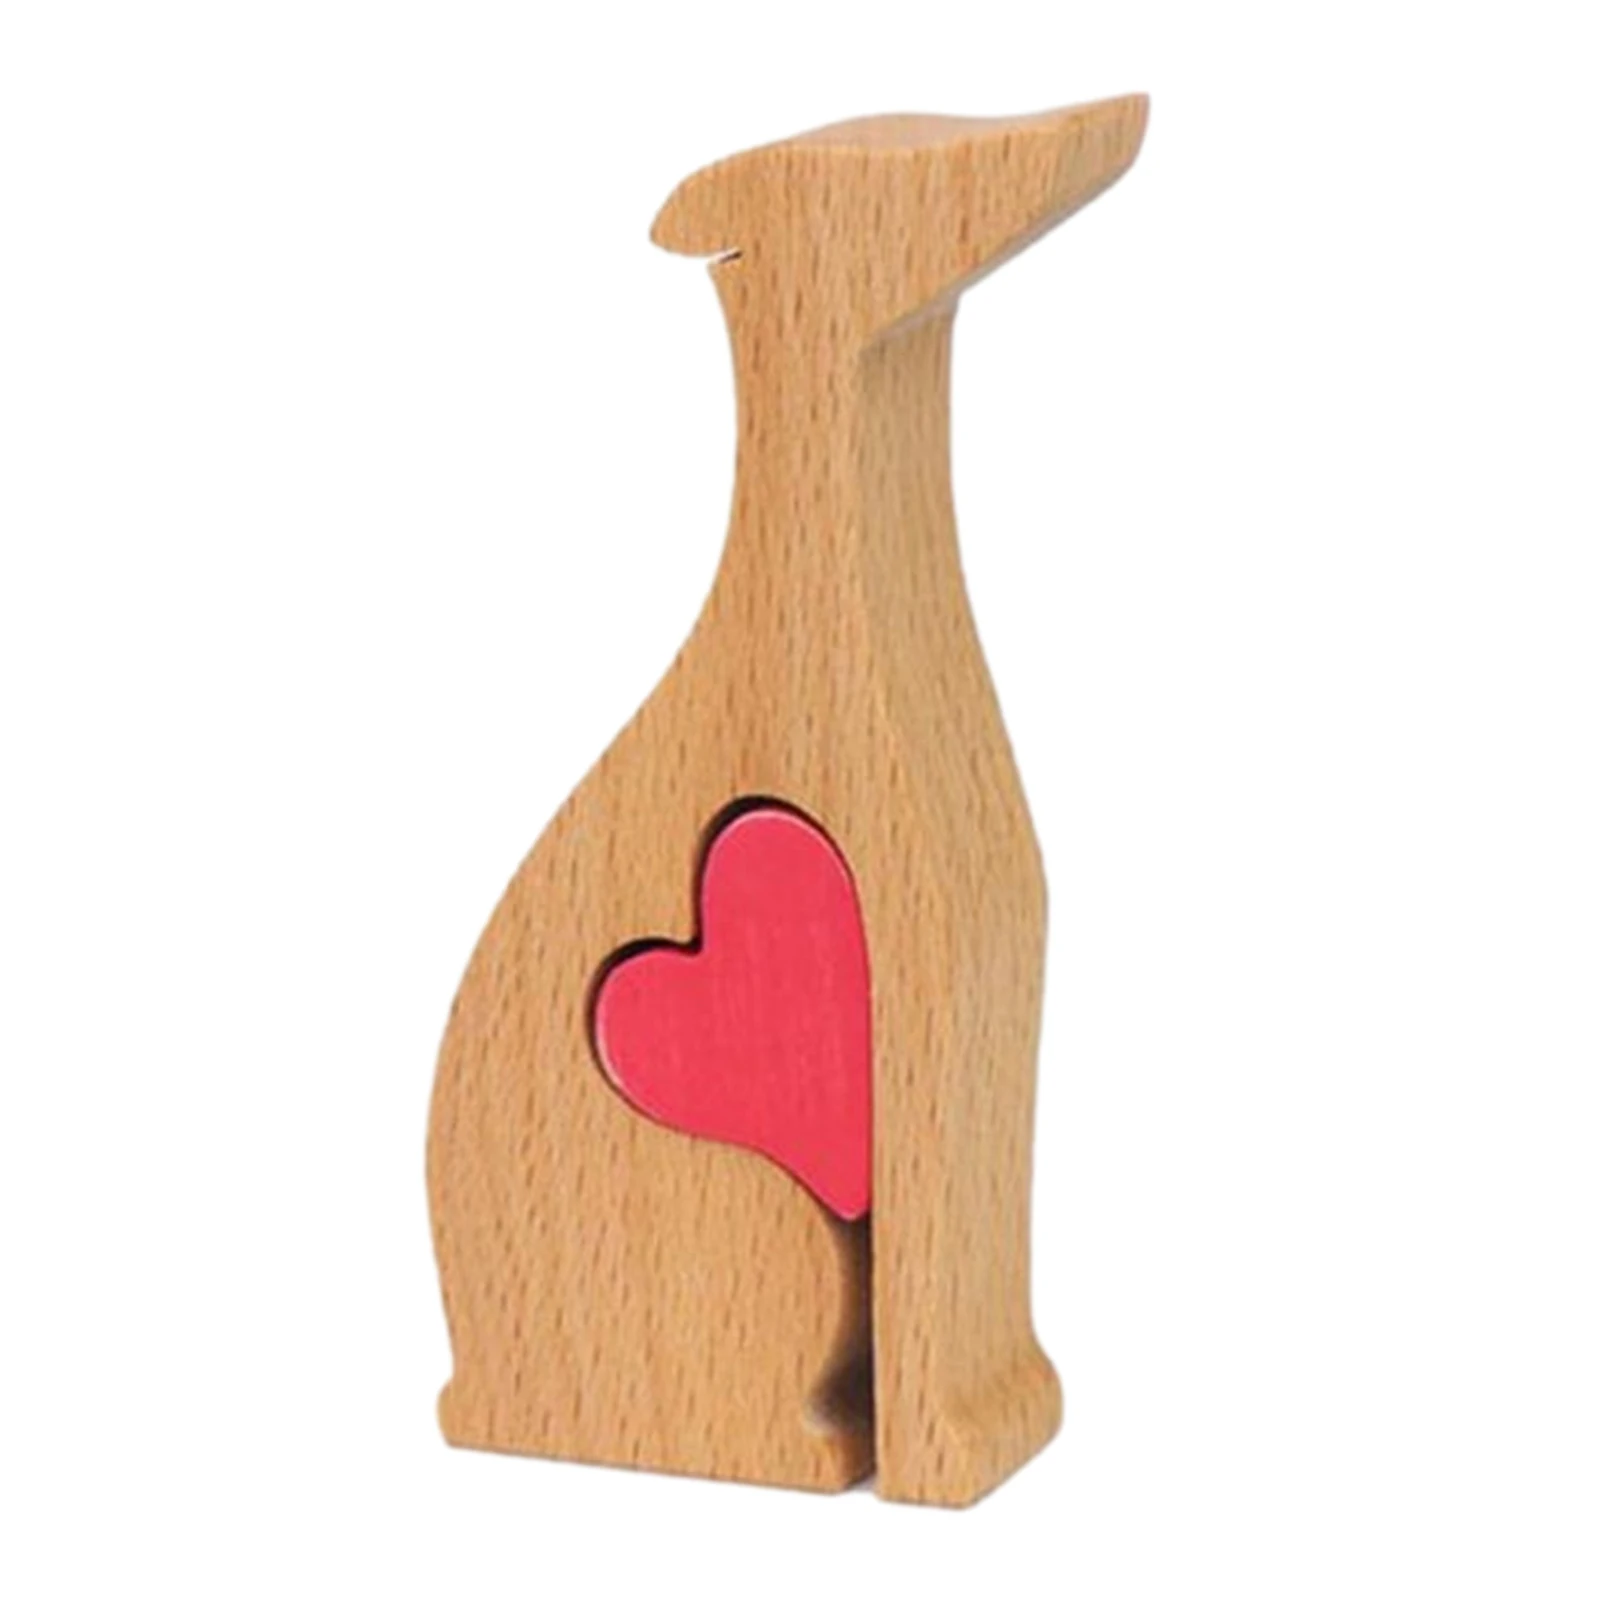 

Wooden Sculptures Handmade Accents Craft Figurine Whippet Dog With Red Heart Statue Animal Sculptures Collection Gift For Men Wo